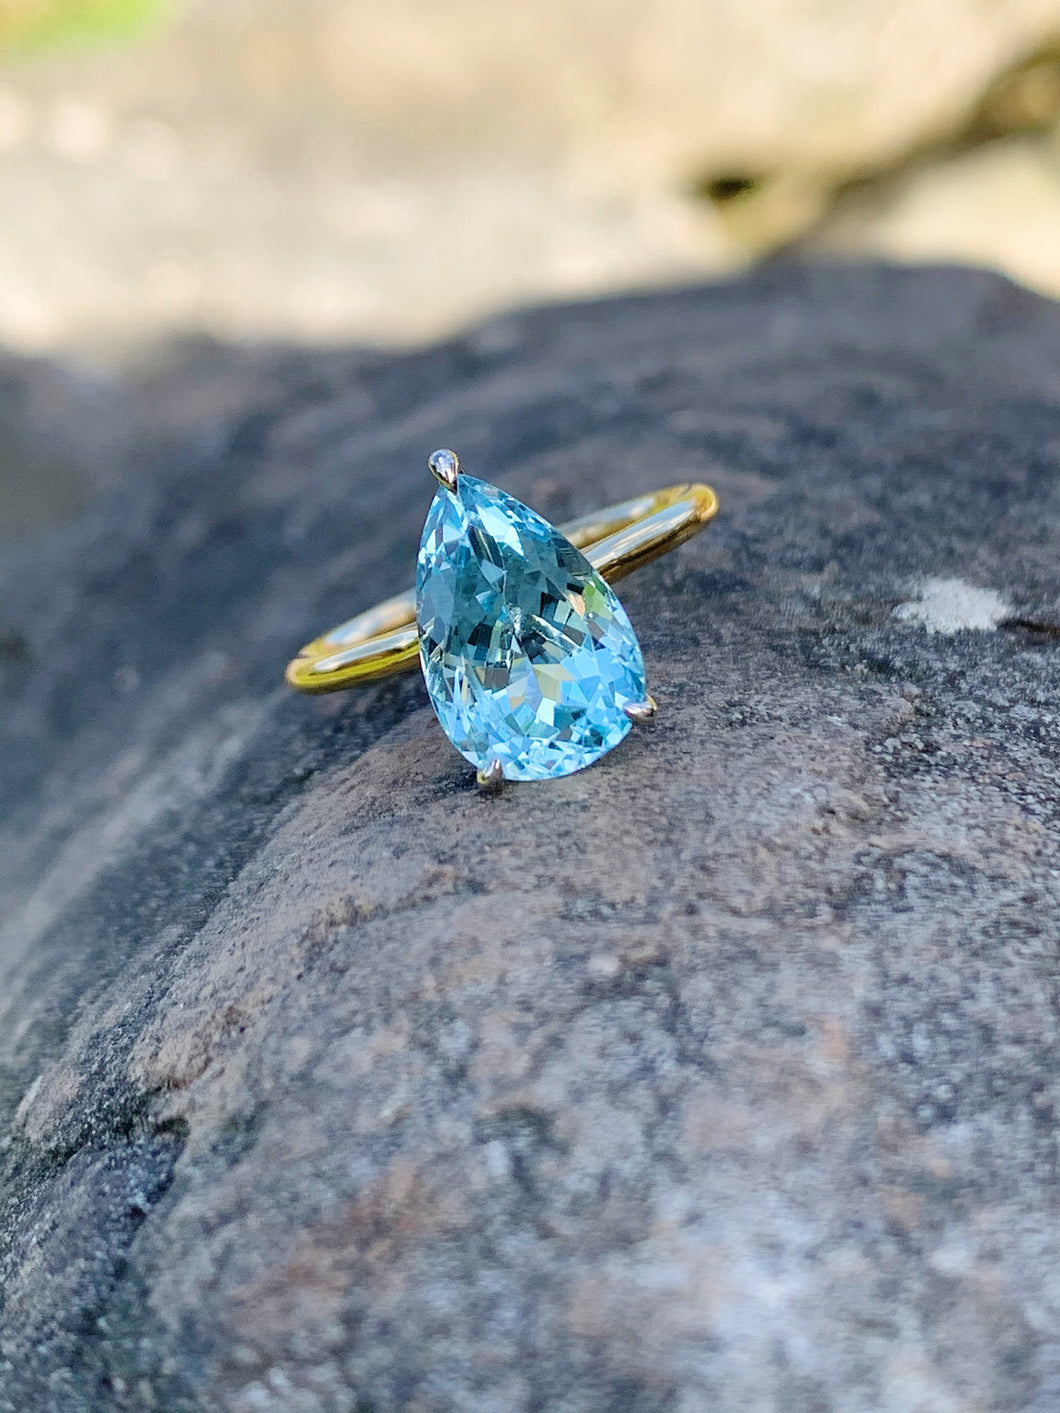 Lovely 3.28 Carat, Pear-Shaped Natural Aquamarine Solitaire Ring